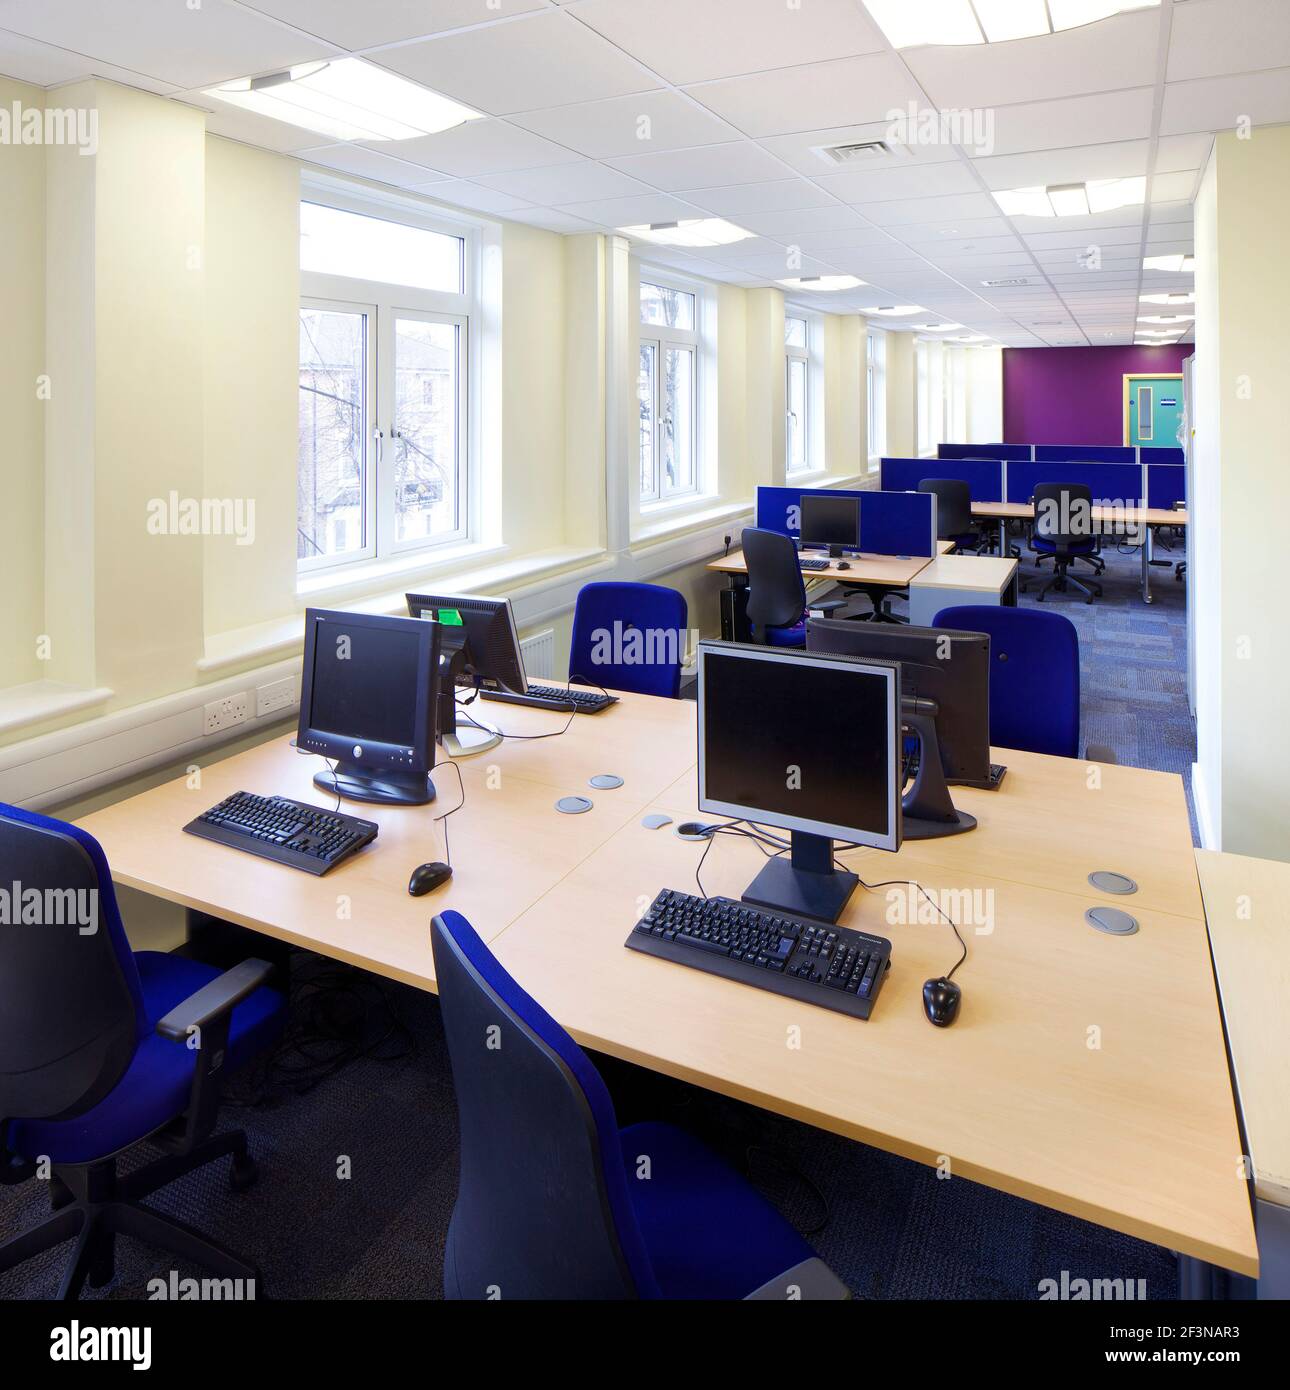 Met Police Brixton Borough Based Custody Centre, Brixton London. Wates Construction have refurbished the offices and constructed a new custody centre. Stock Photo